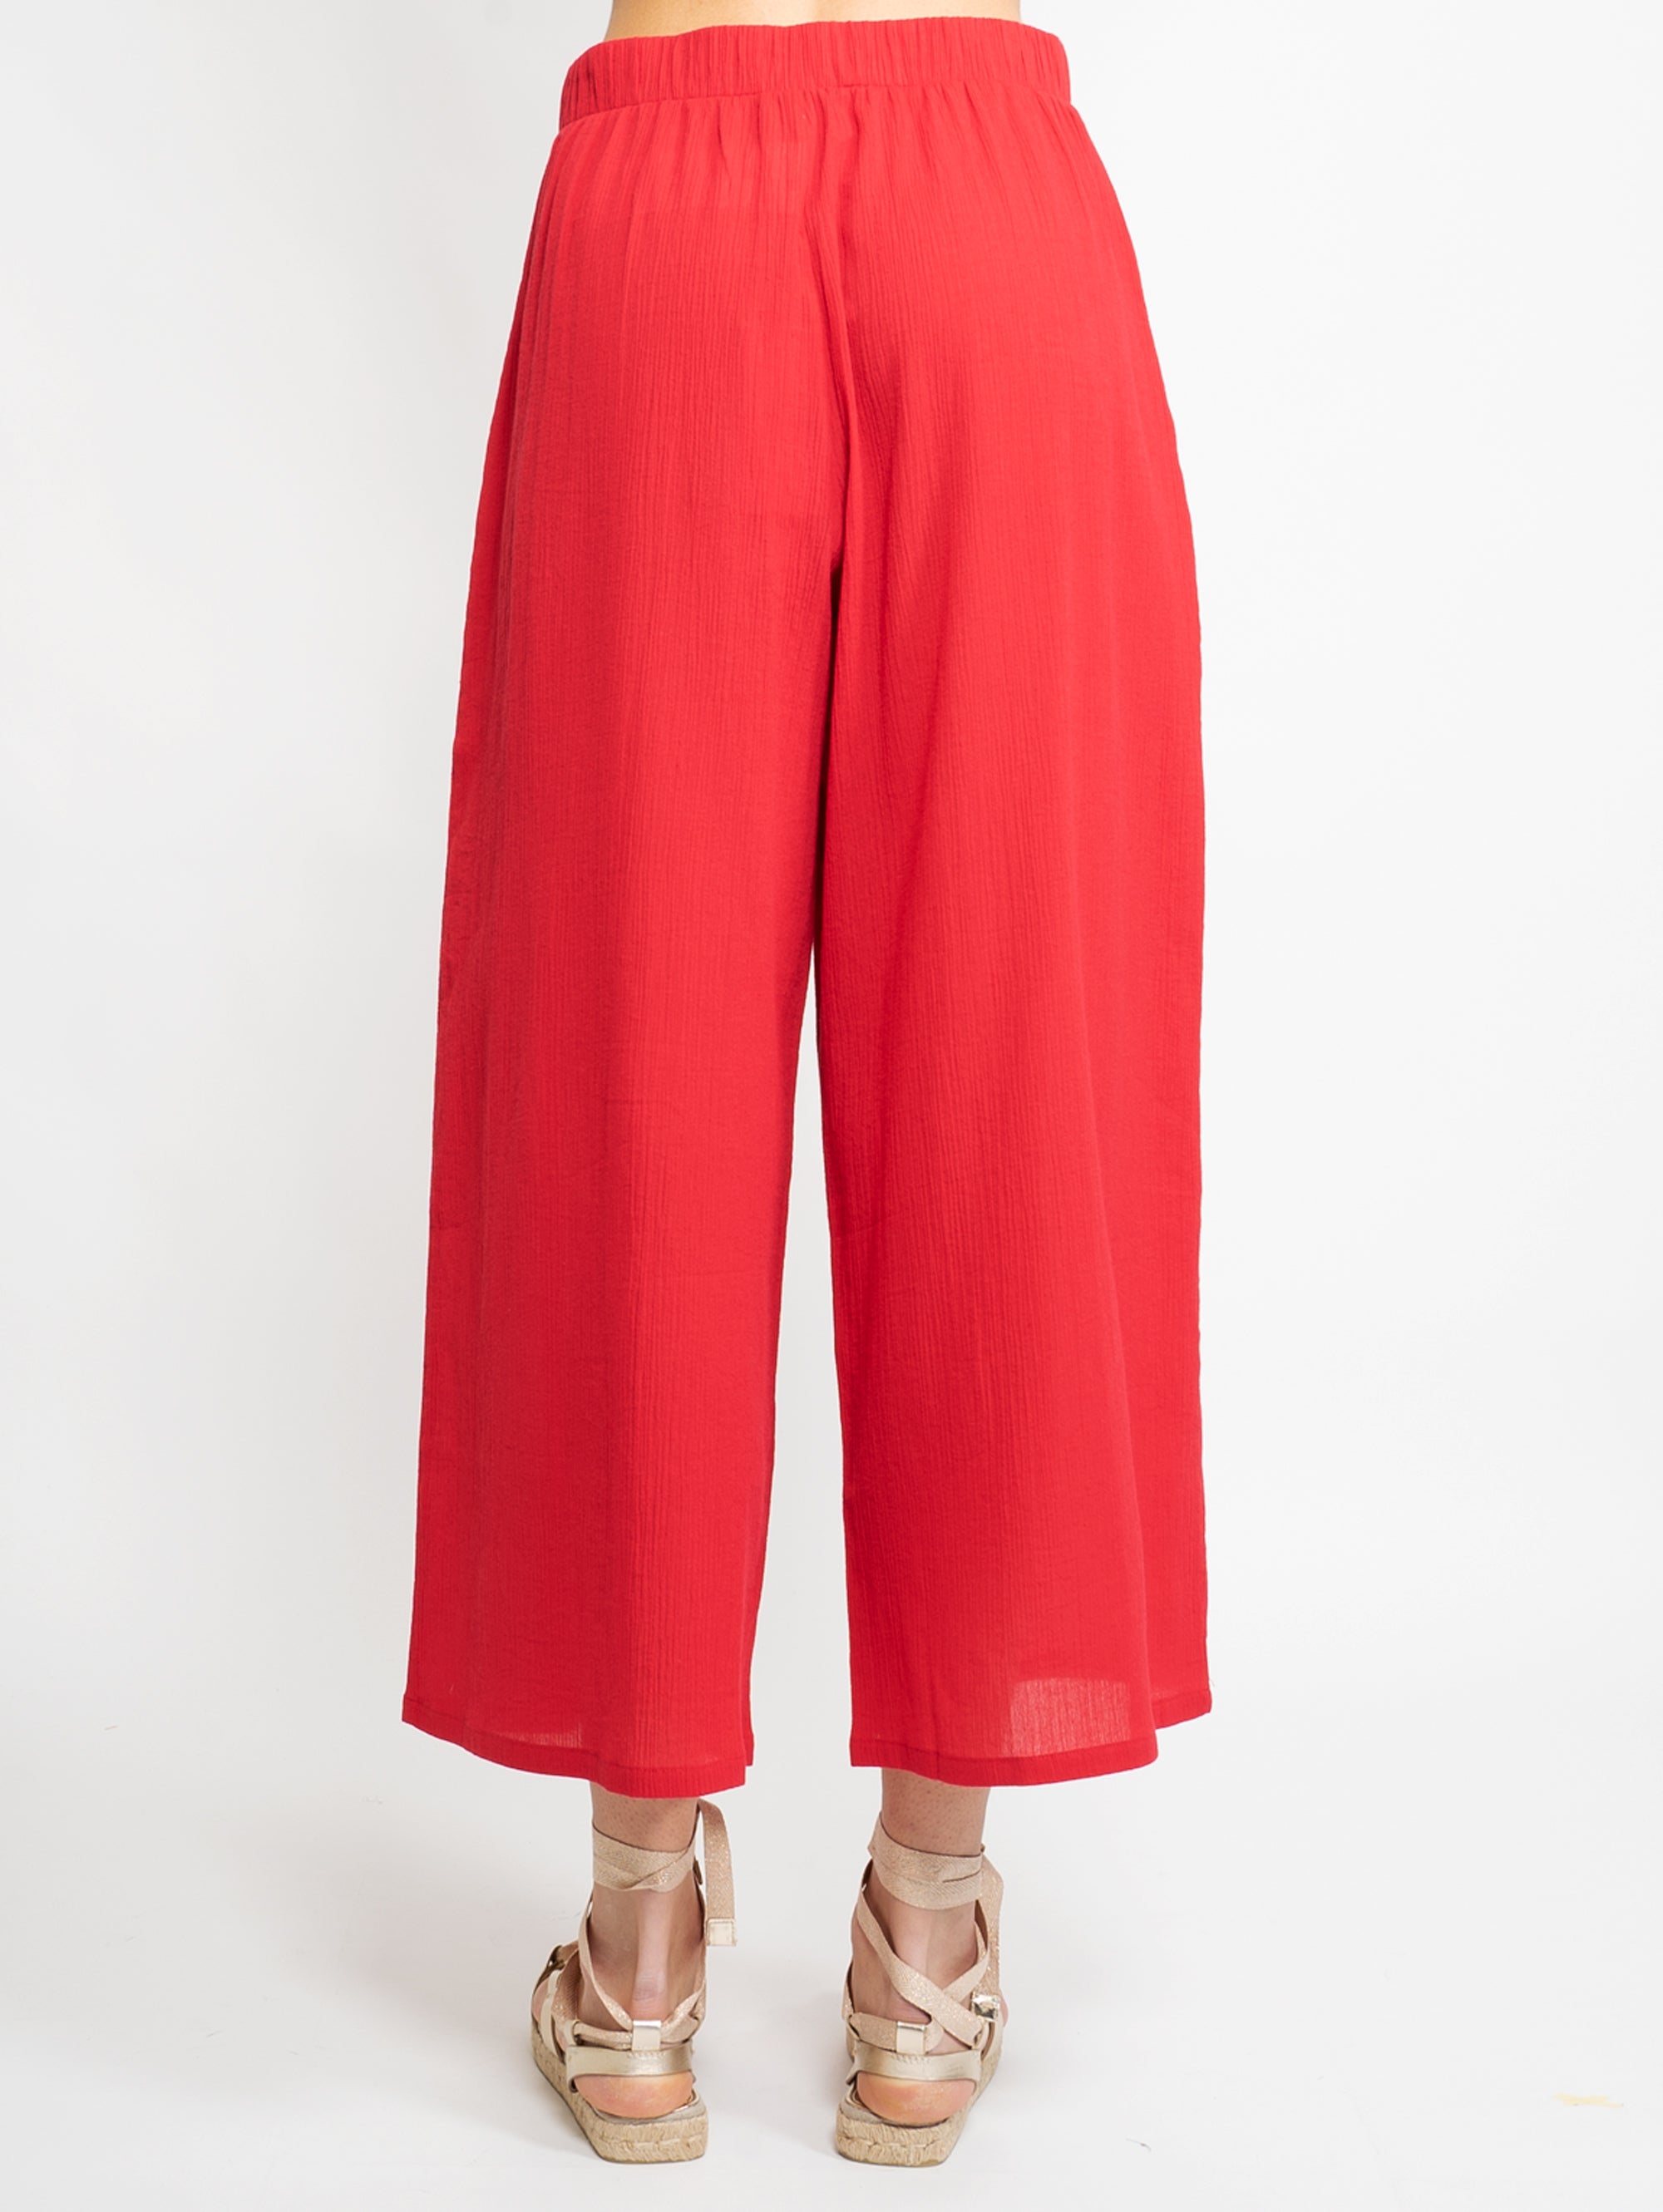 Wide Pants in Red Cotton Muslin